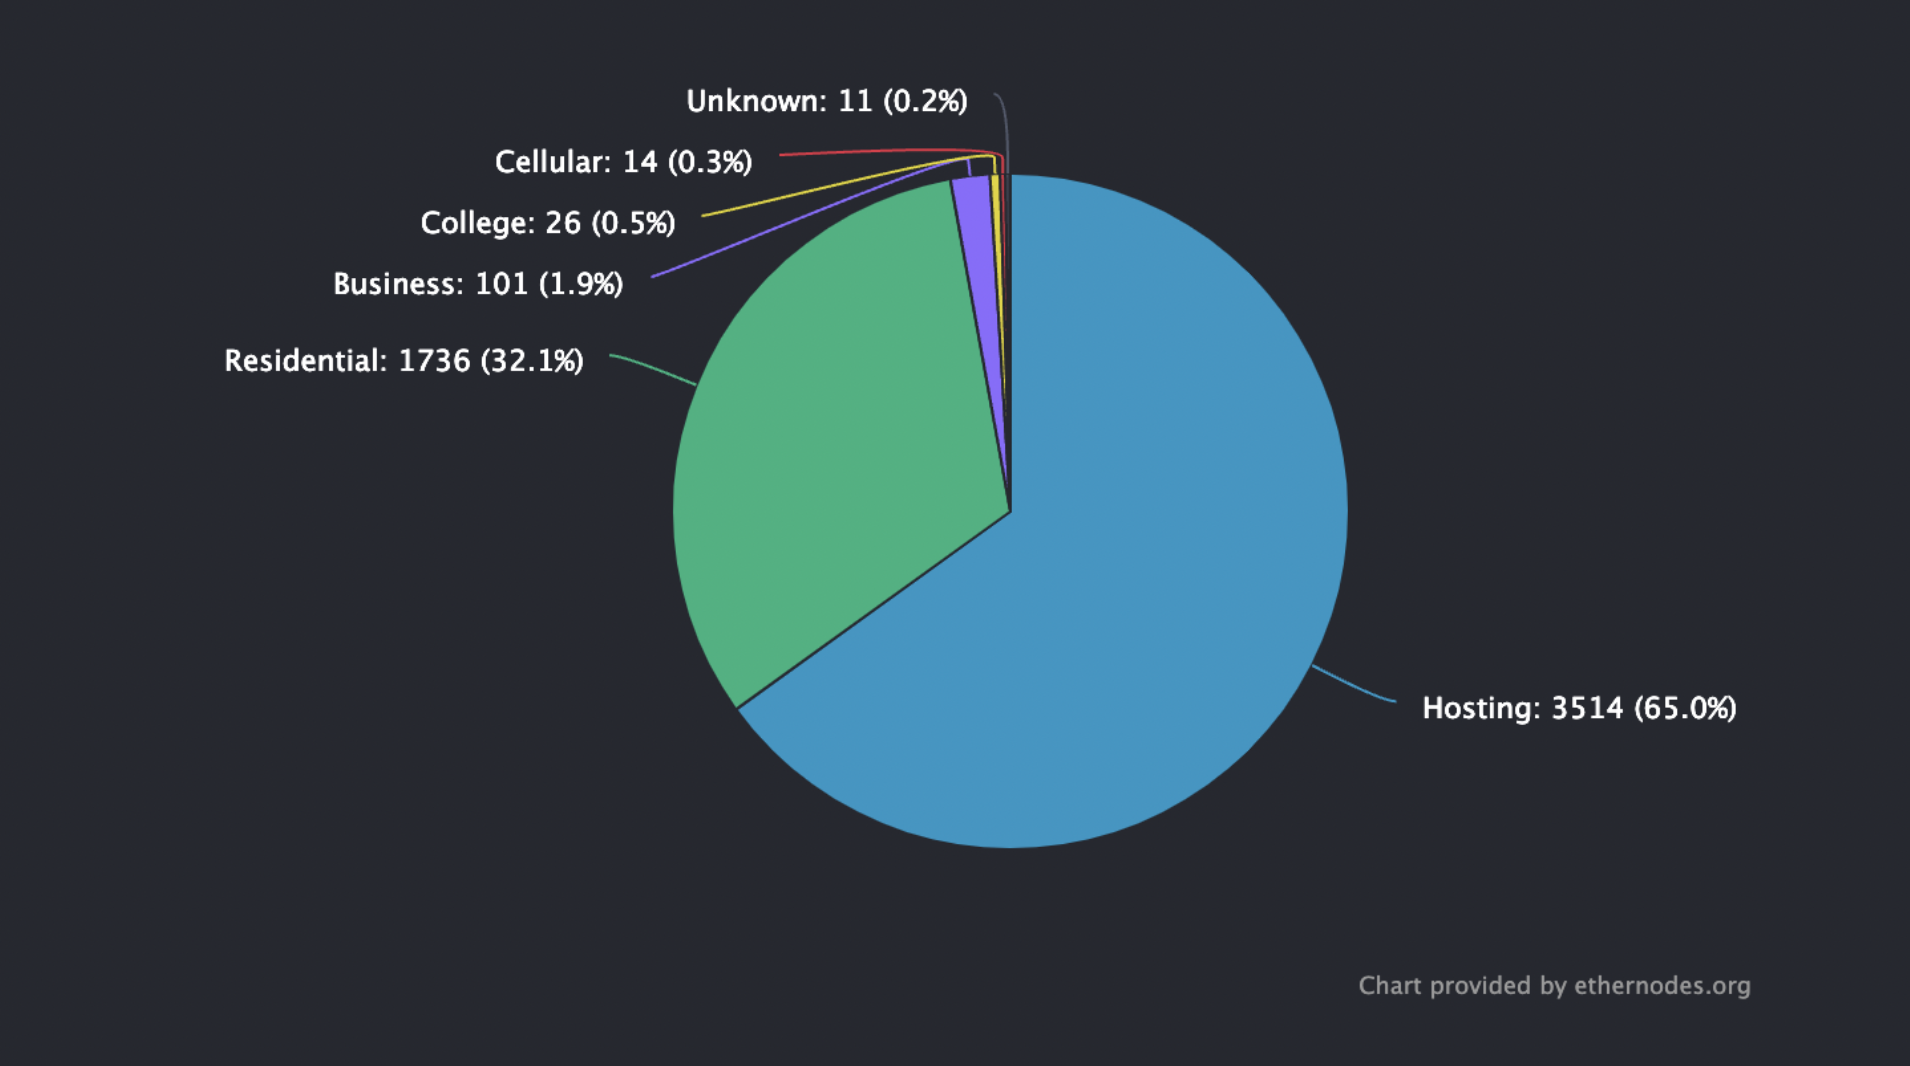 Estimated number of Ethereum Nodes, represented by network type (ethernodes.org, 05.03.22)